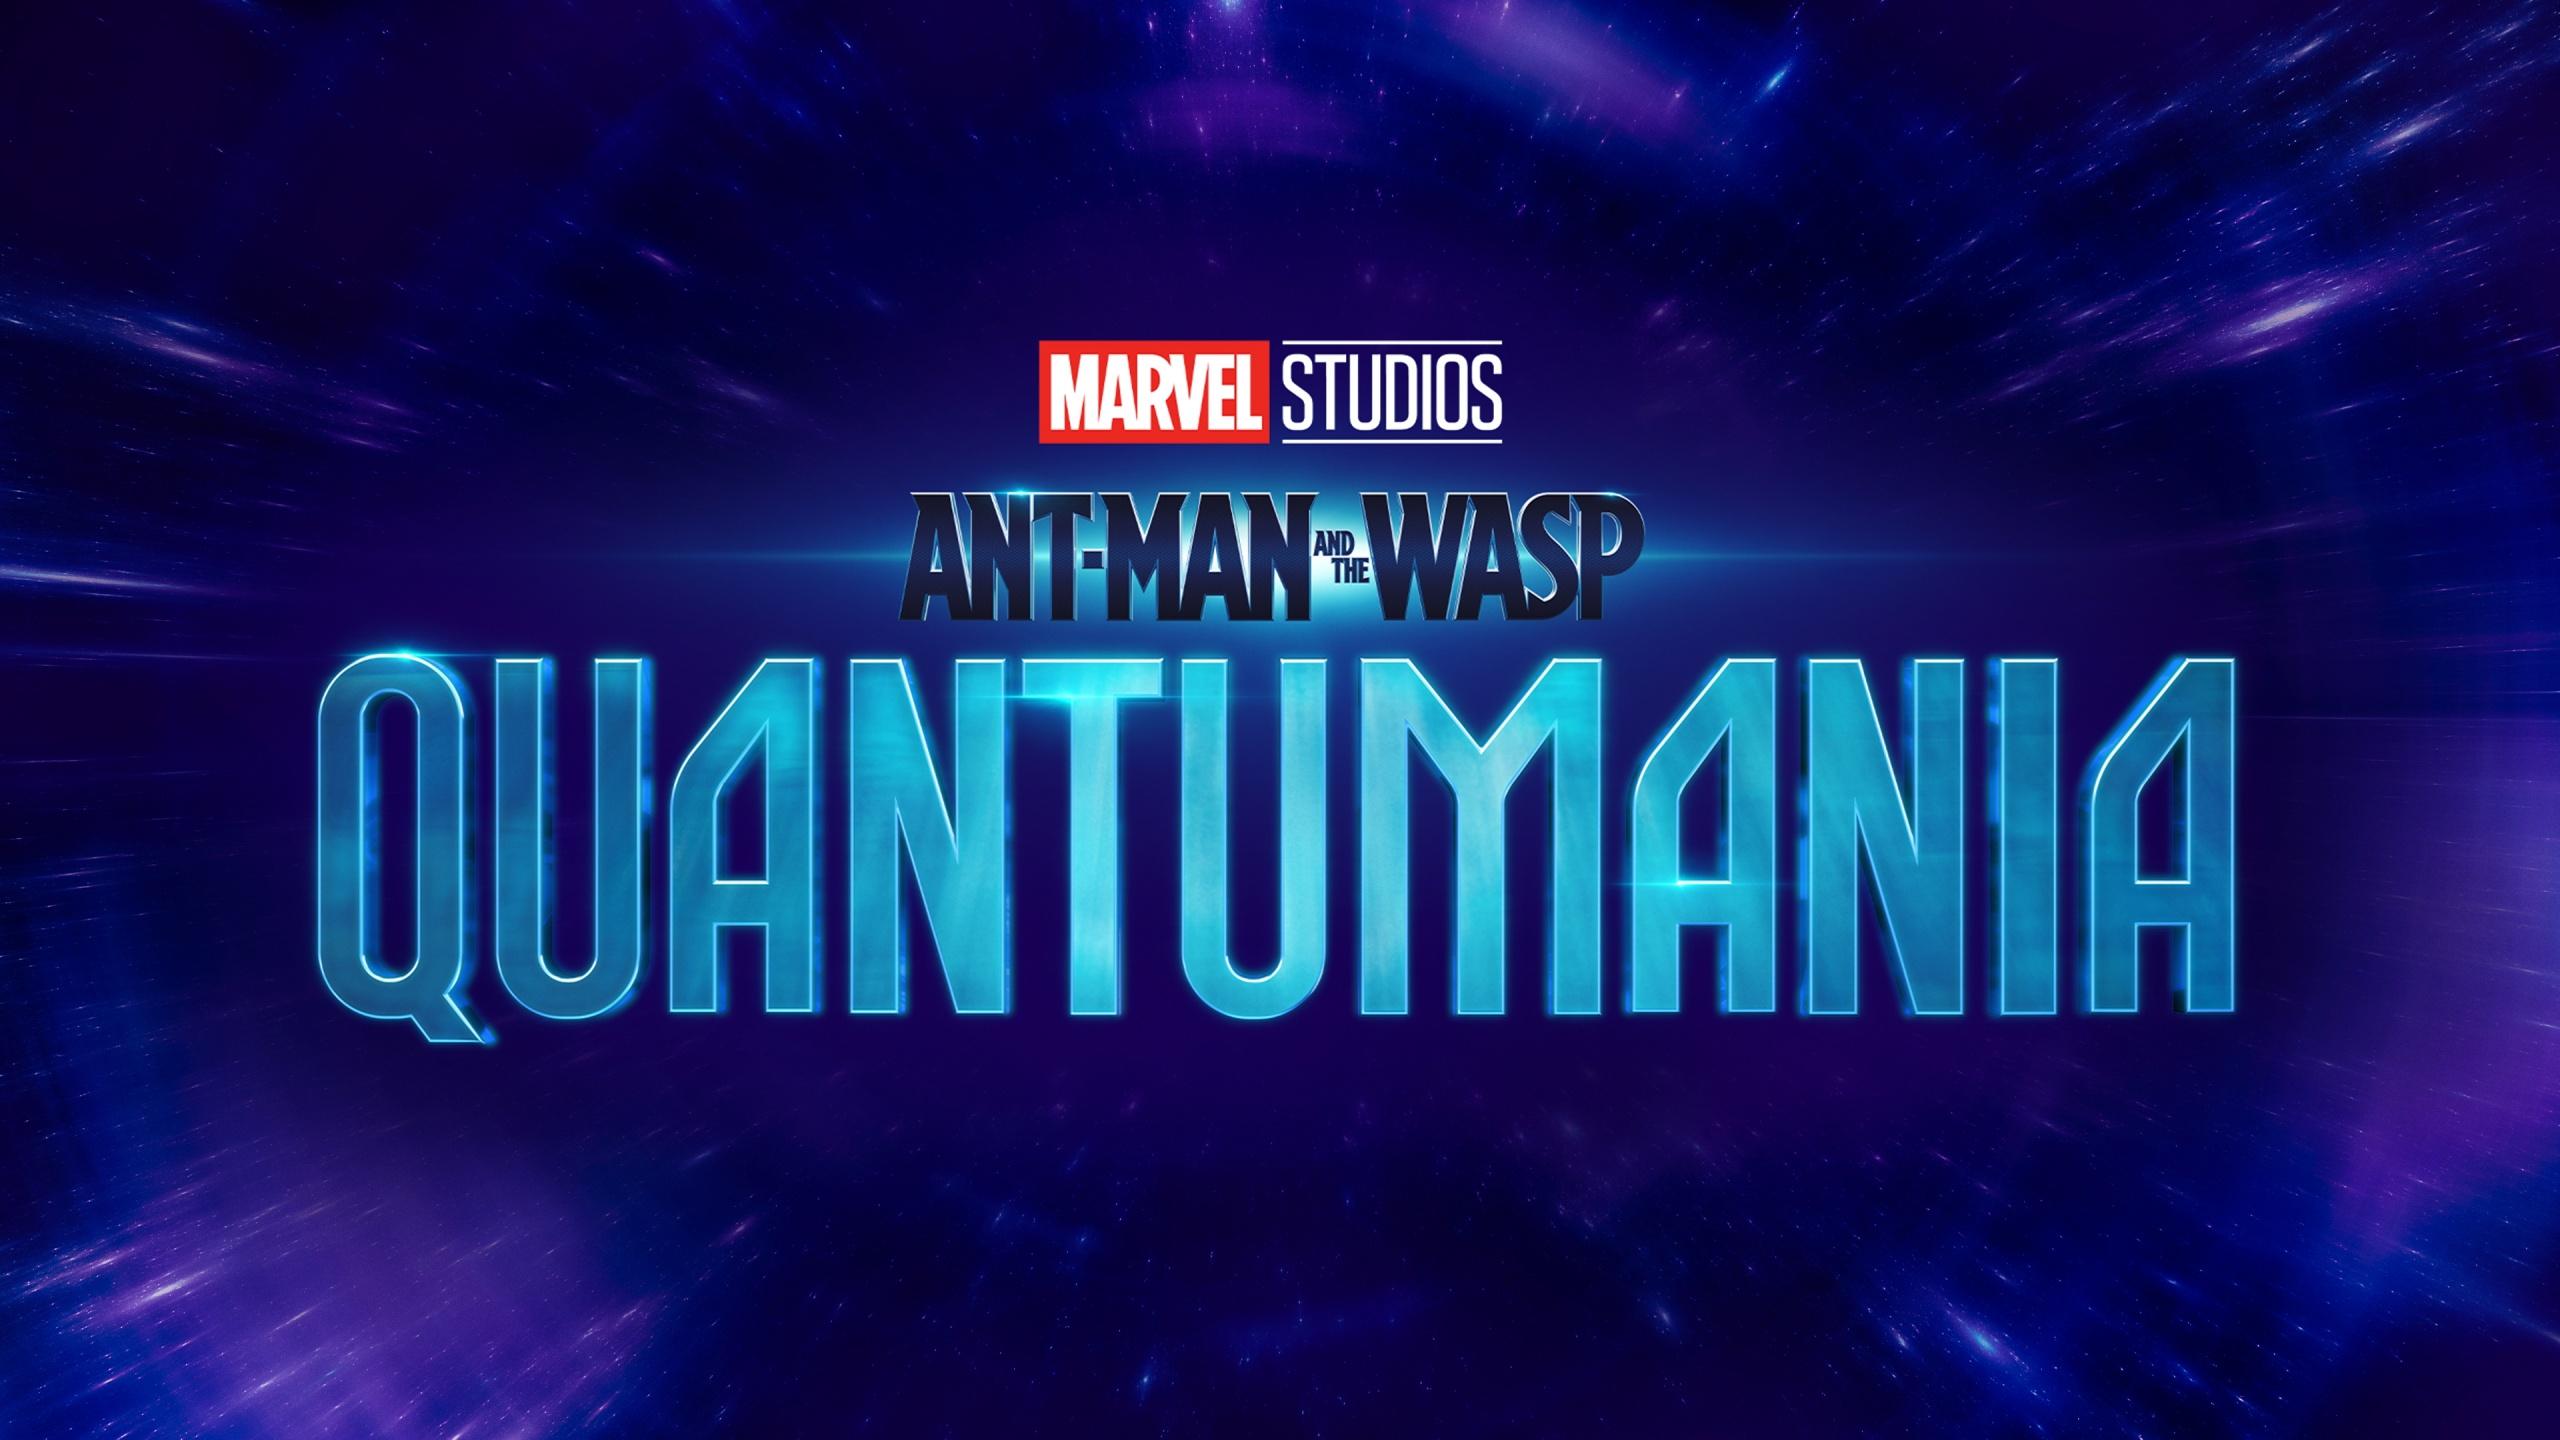 MCU  The Direct on Twitter An official new ANTMAN AND THE WASP  QUANTUMANIA promo poster has been released More new photos  httpstcoBEAtCAasCm httpstcodbVTWiFJSk  X